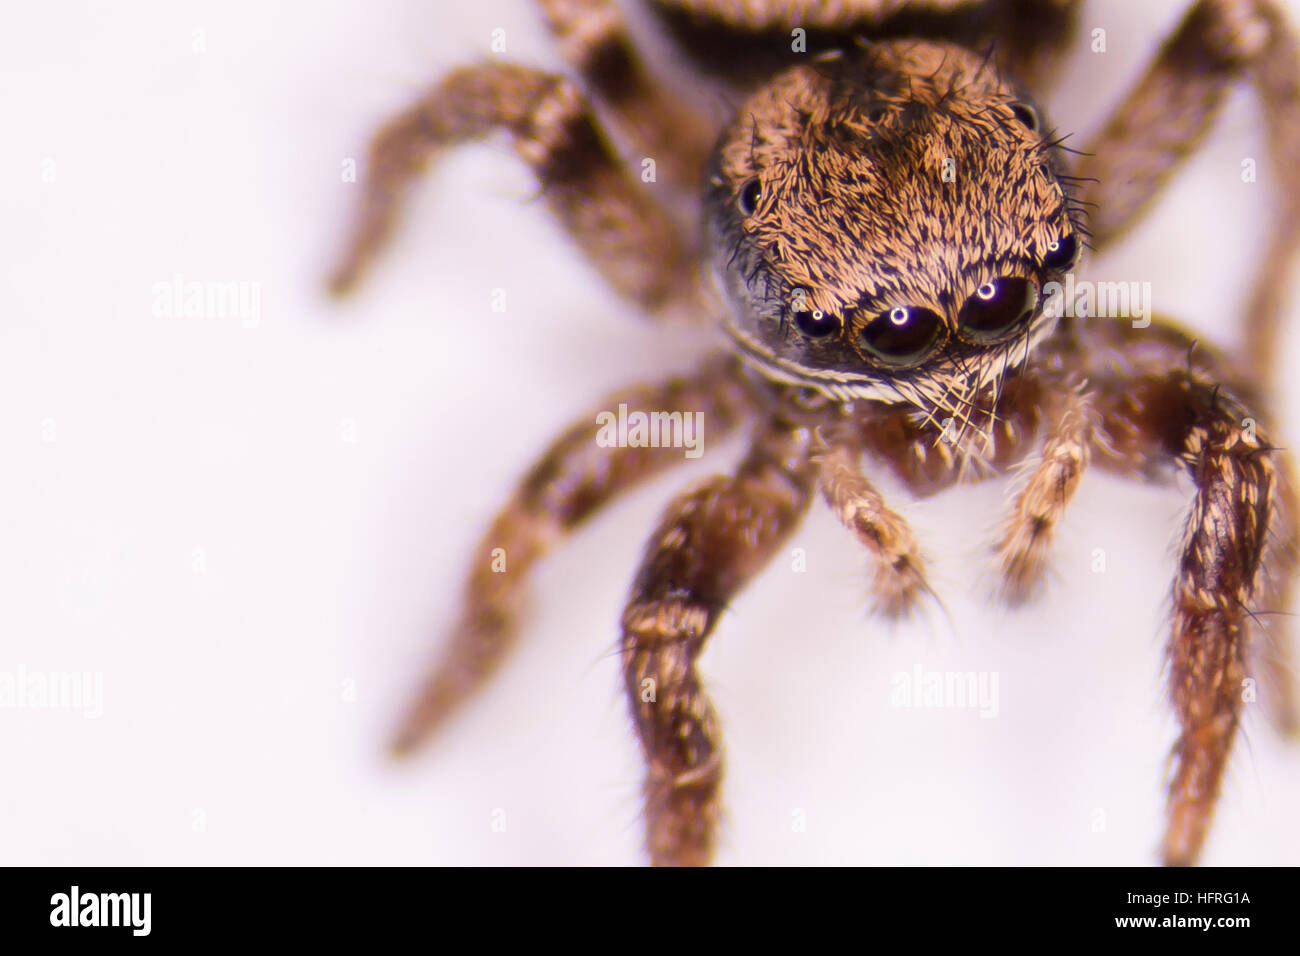 Close-up of a juvenile Habronattus oregonensis (a jumping spider). Photographed on a white background. Stock Photo